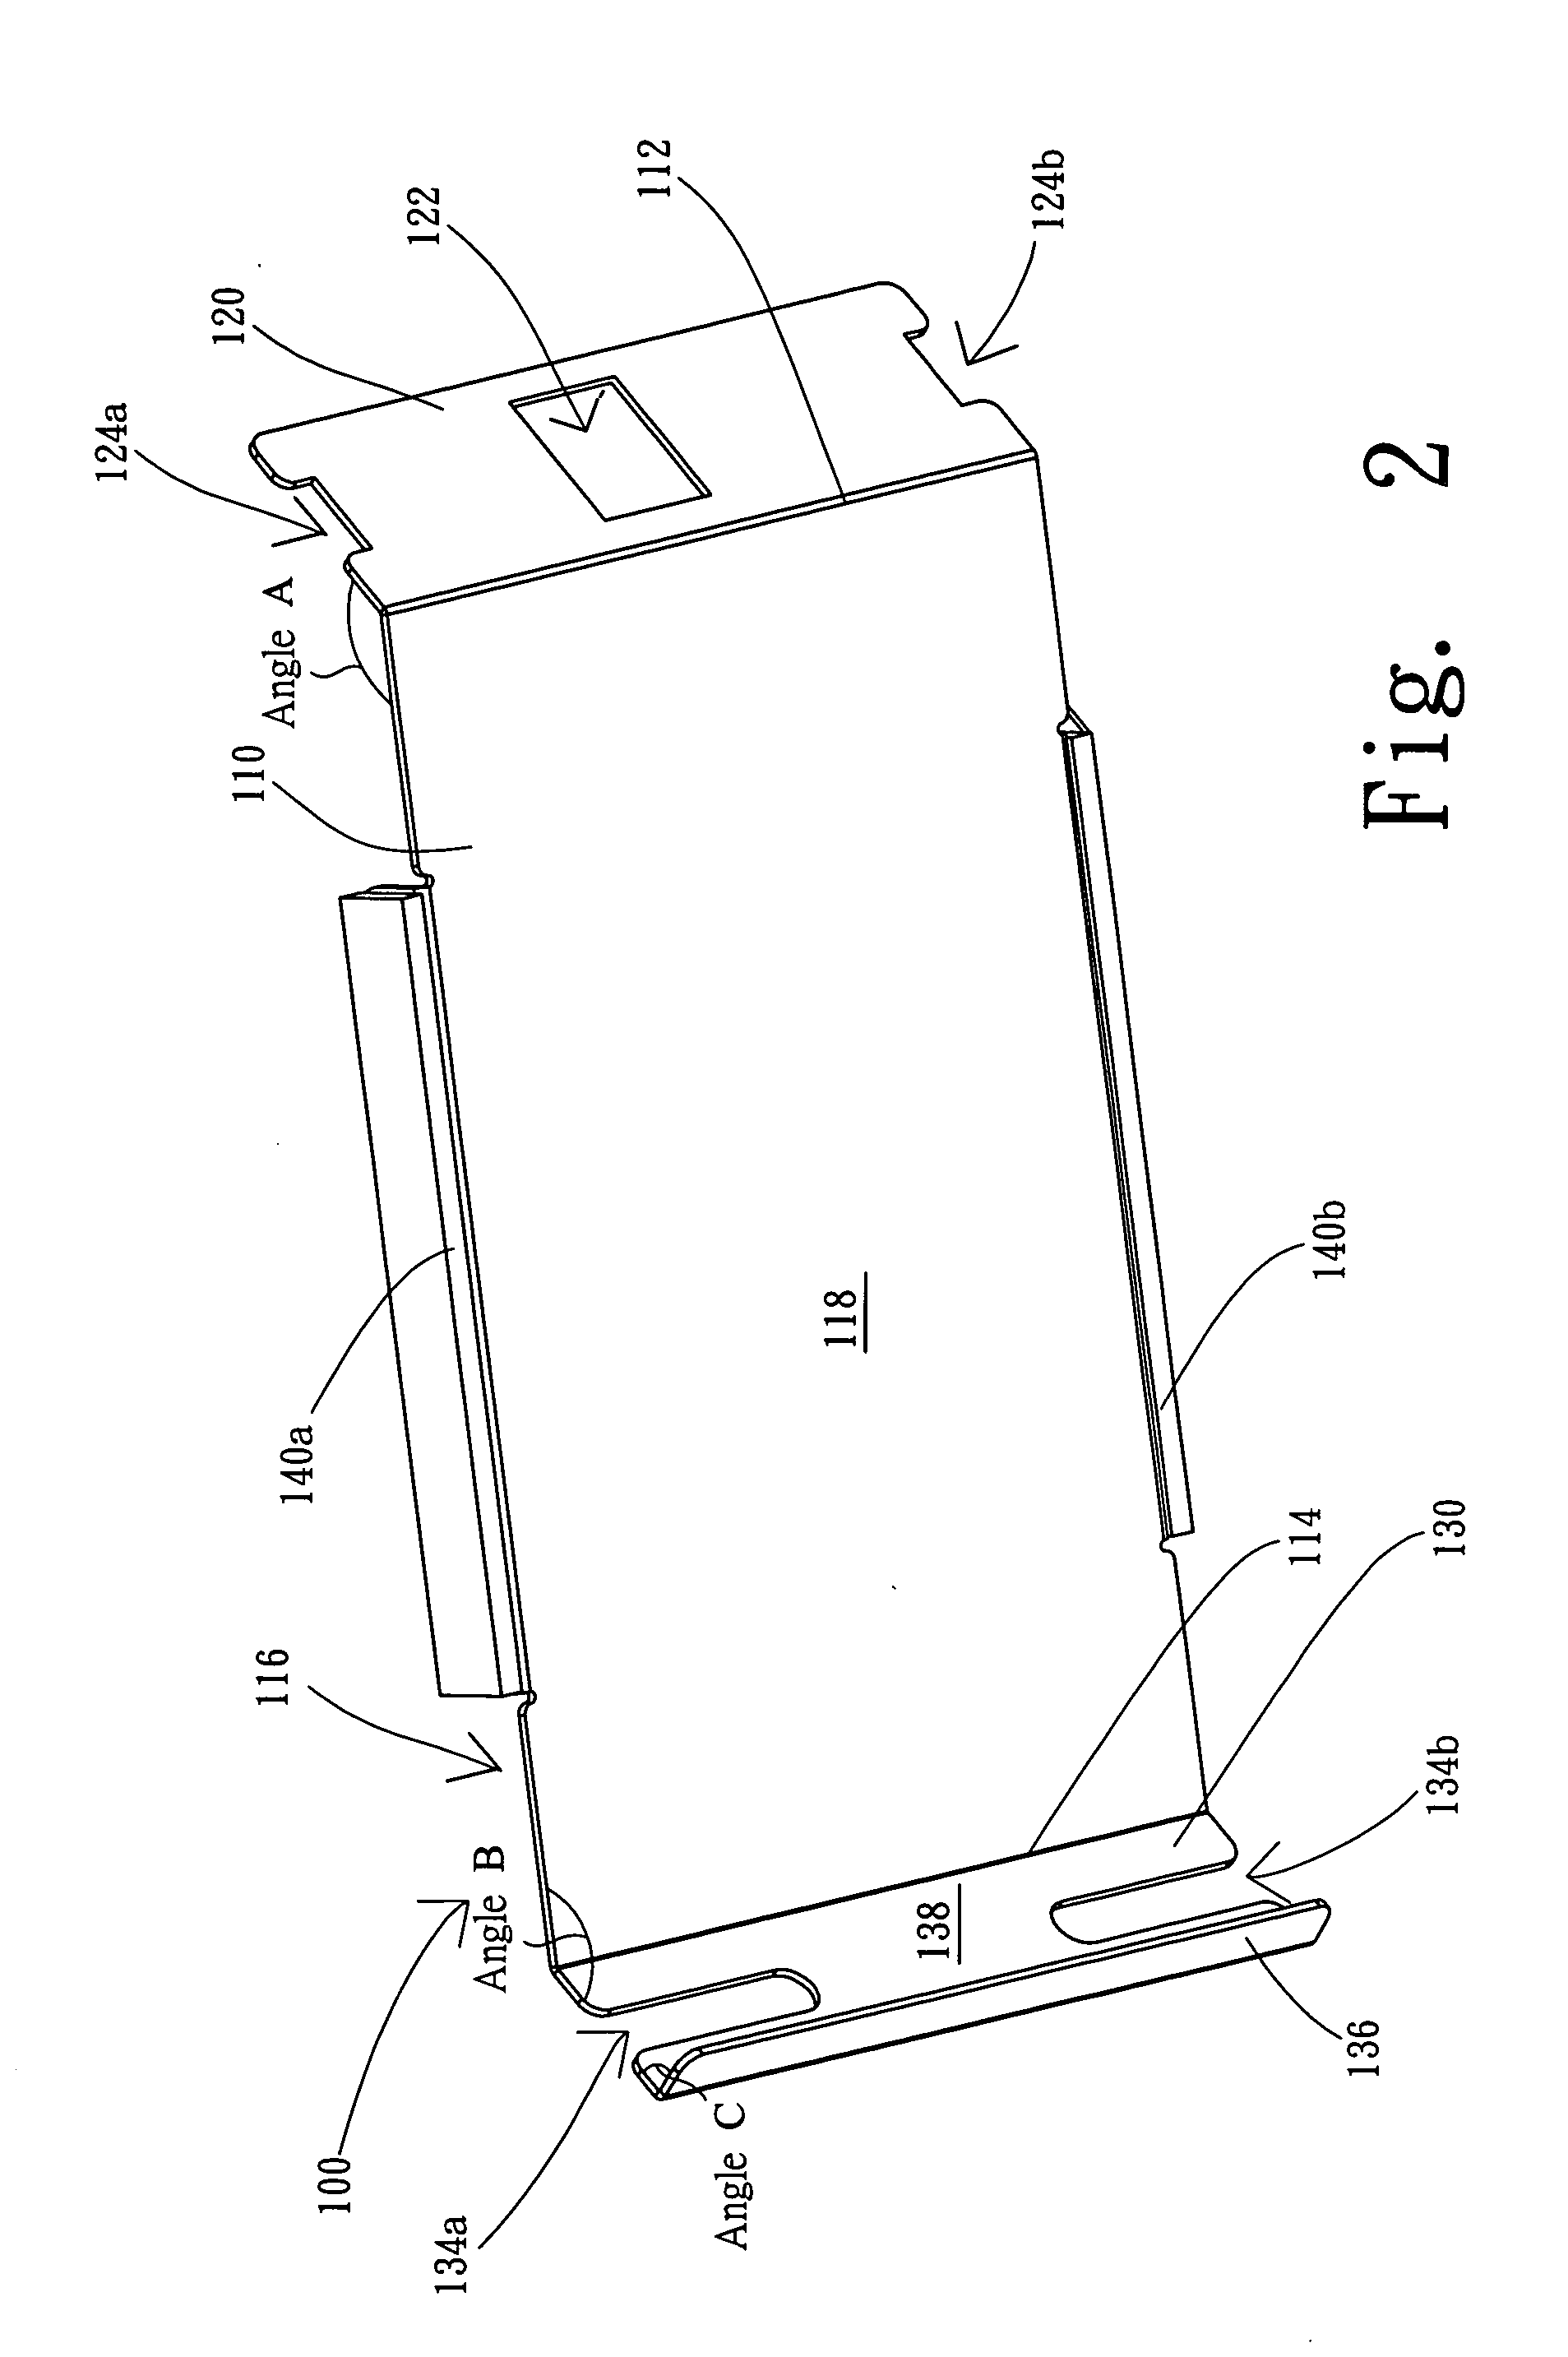 Electronic product having airflow-guiding device